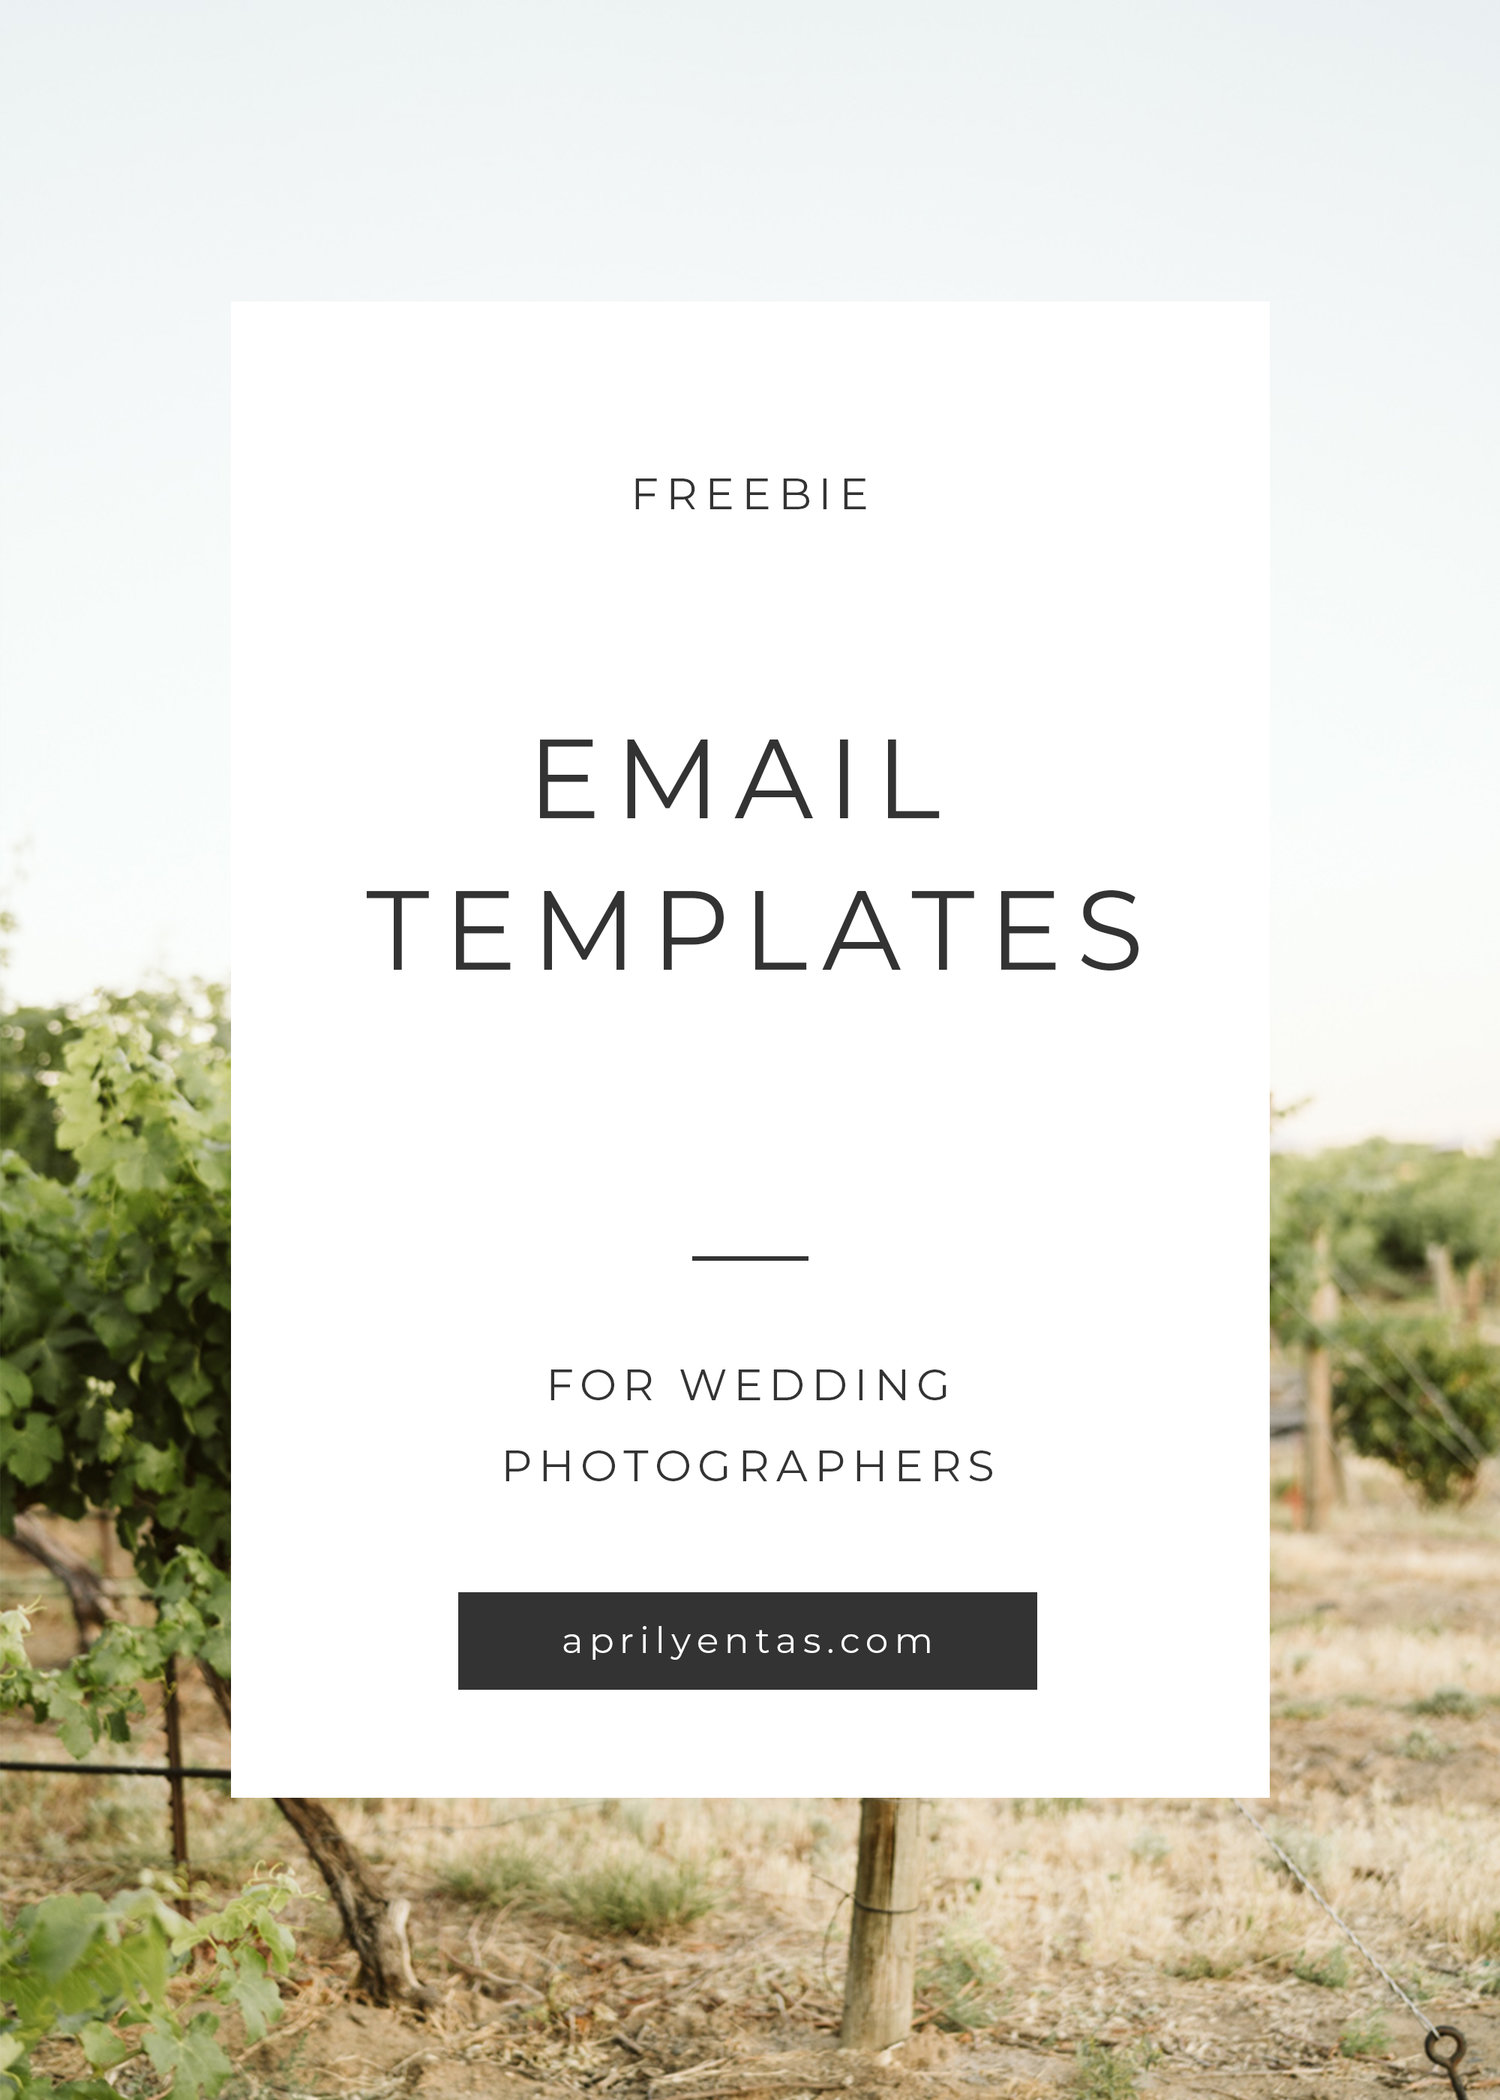 Email Templates For Wedding Photographers Resources For Wedding Photographers Seattle Wedding Photographer